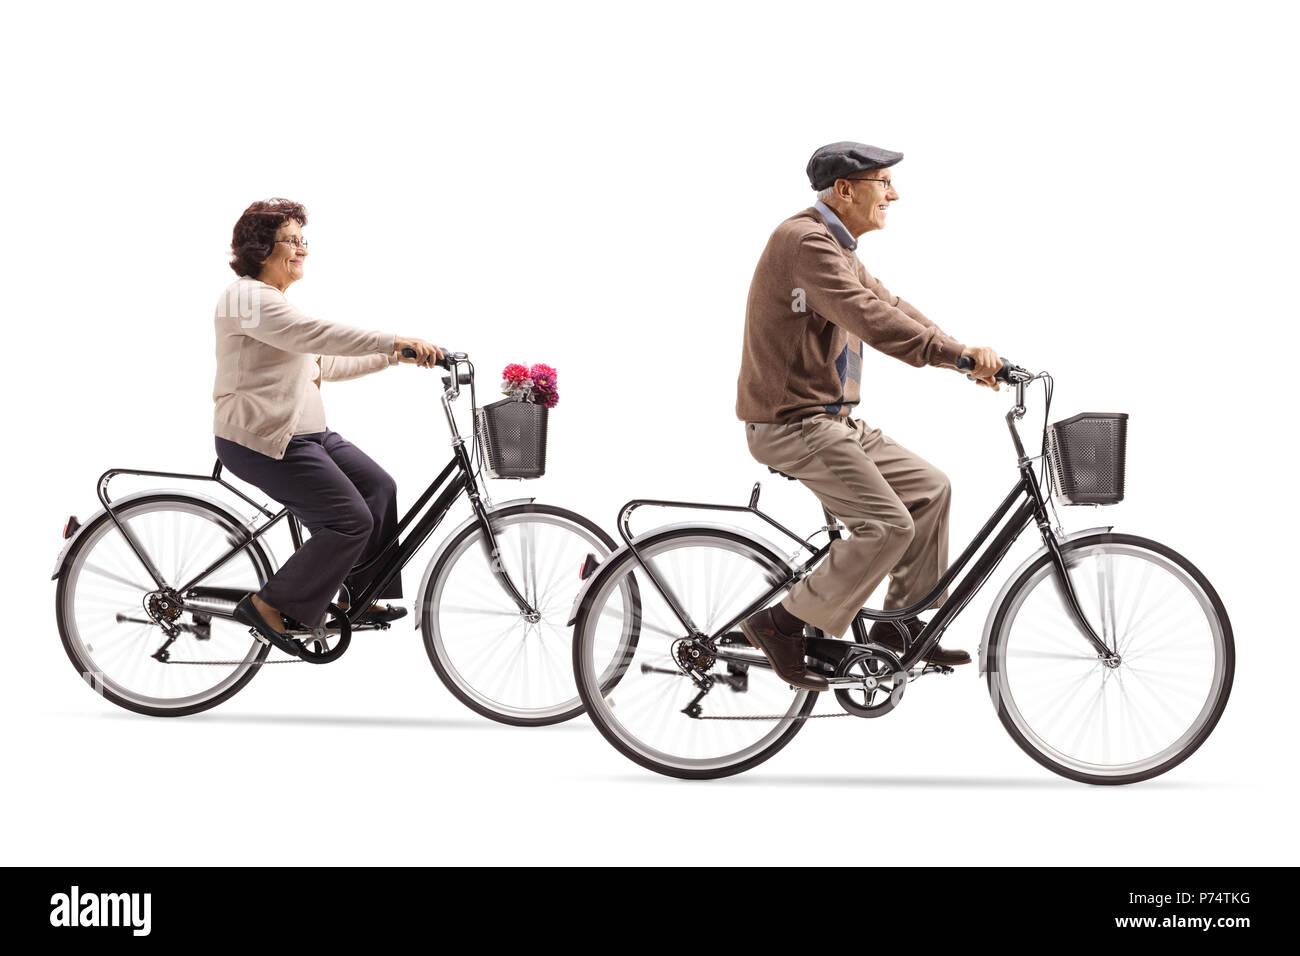 Elderly woman and an elderly man riding bicycles isolated on white background Stock Photo